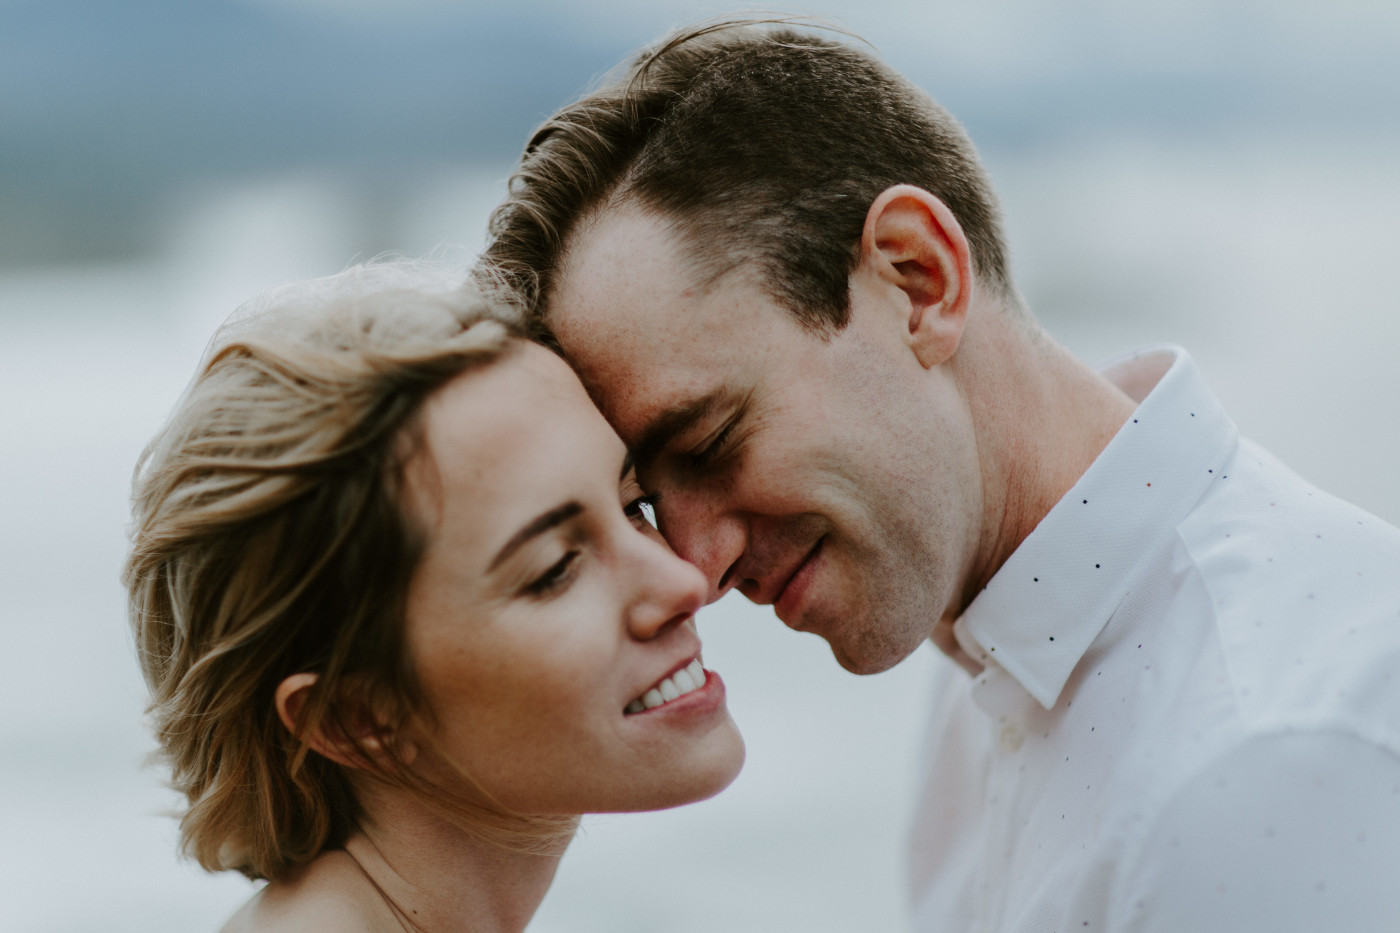 Billy goes to kiss Chelsey on the cheek. Elopement wedding photography at Cannon Beach by Sienna Plus Josh.